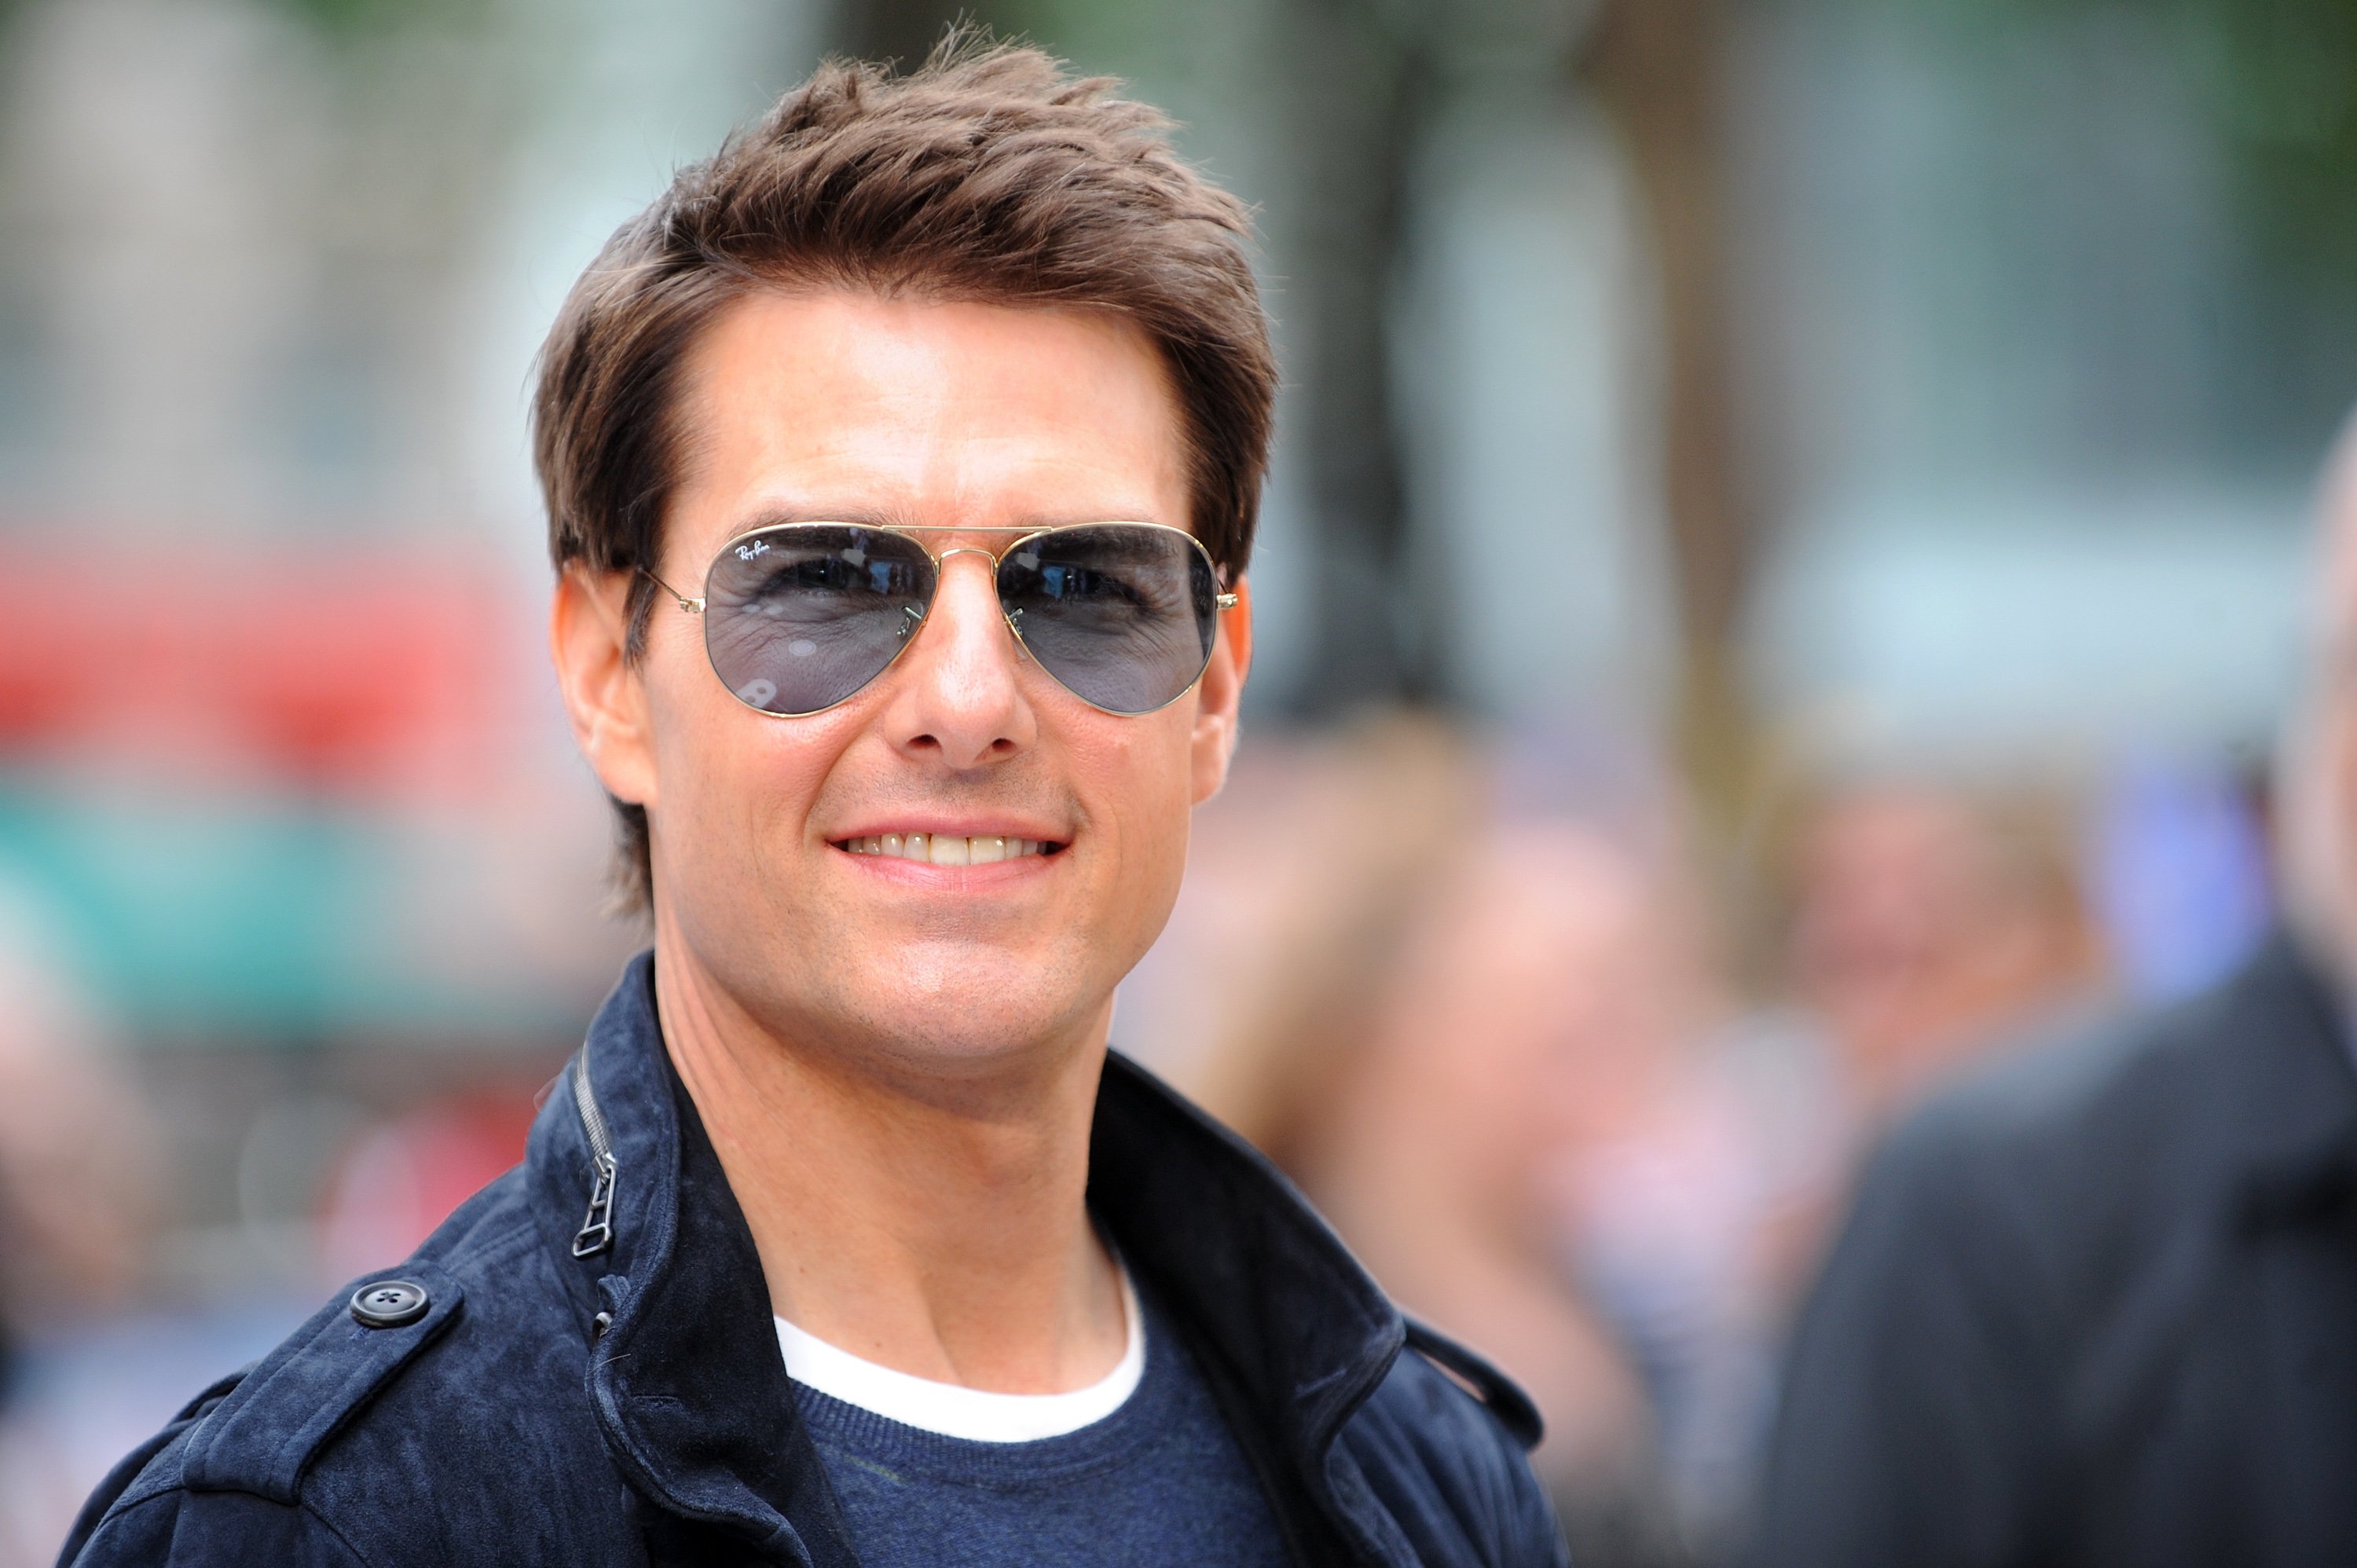 Tom Cruise attends the European premiere of "Rock Of Ages" in London, England on June 10, 2012 | Photo: Getty Images